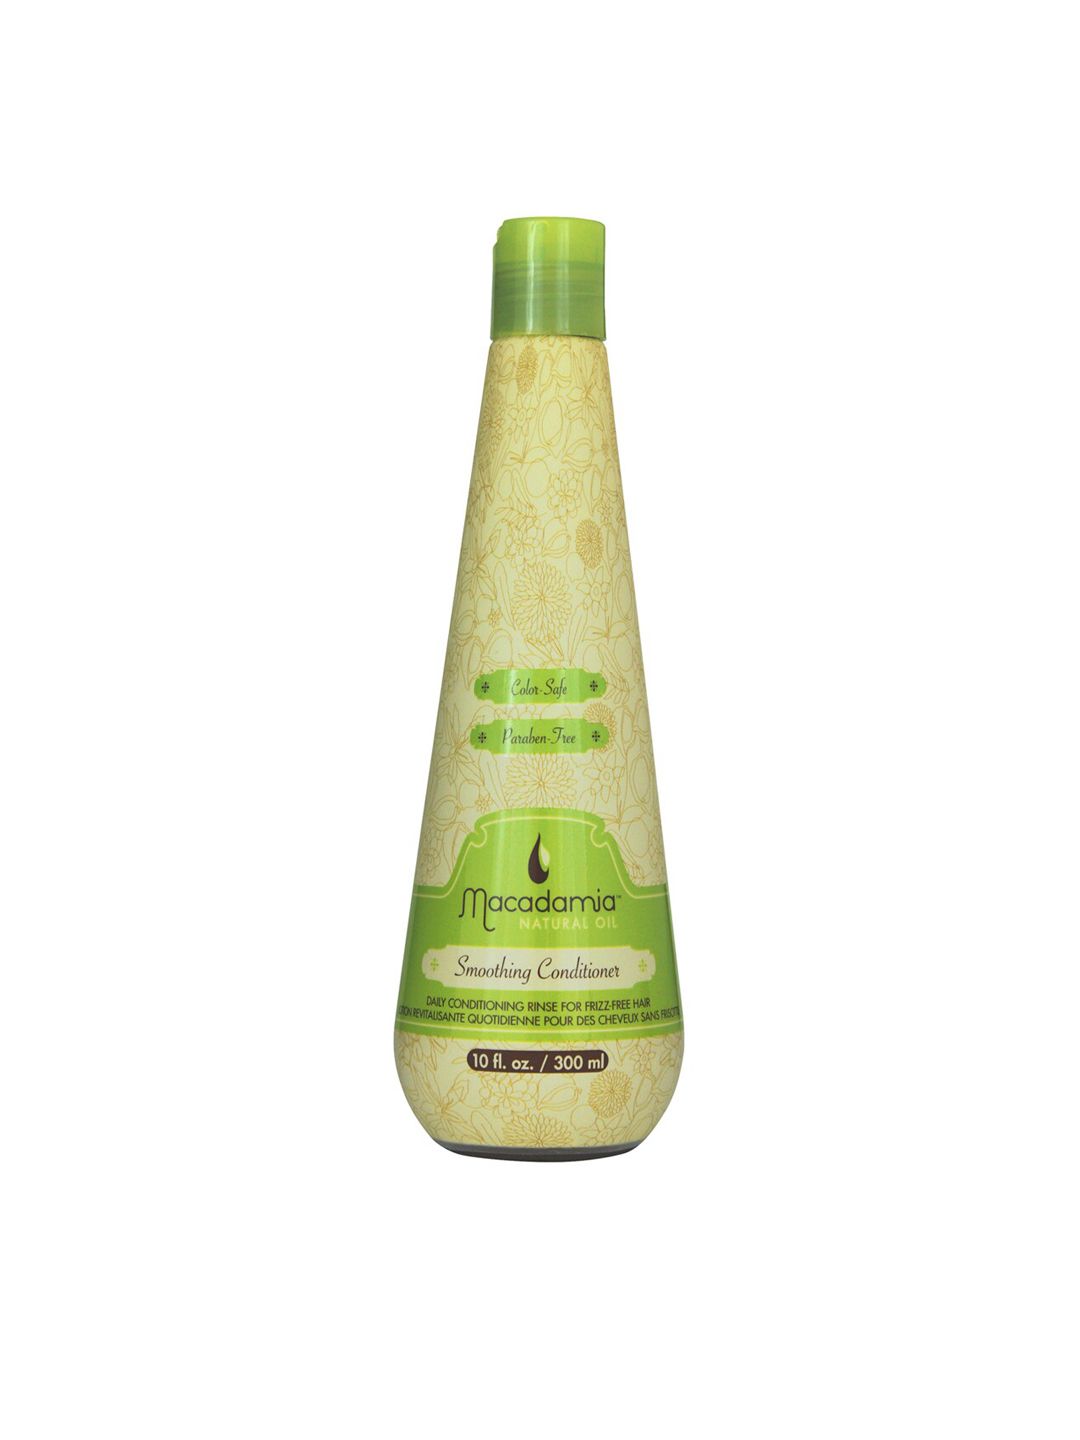 Macadamia Natural Oil Smoothing Conditioner 300 ML Price in India